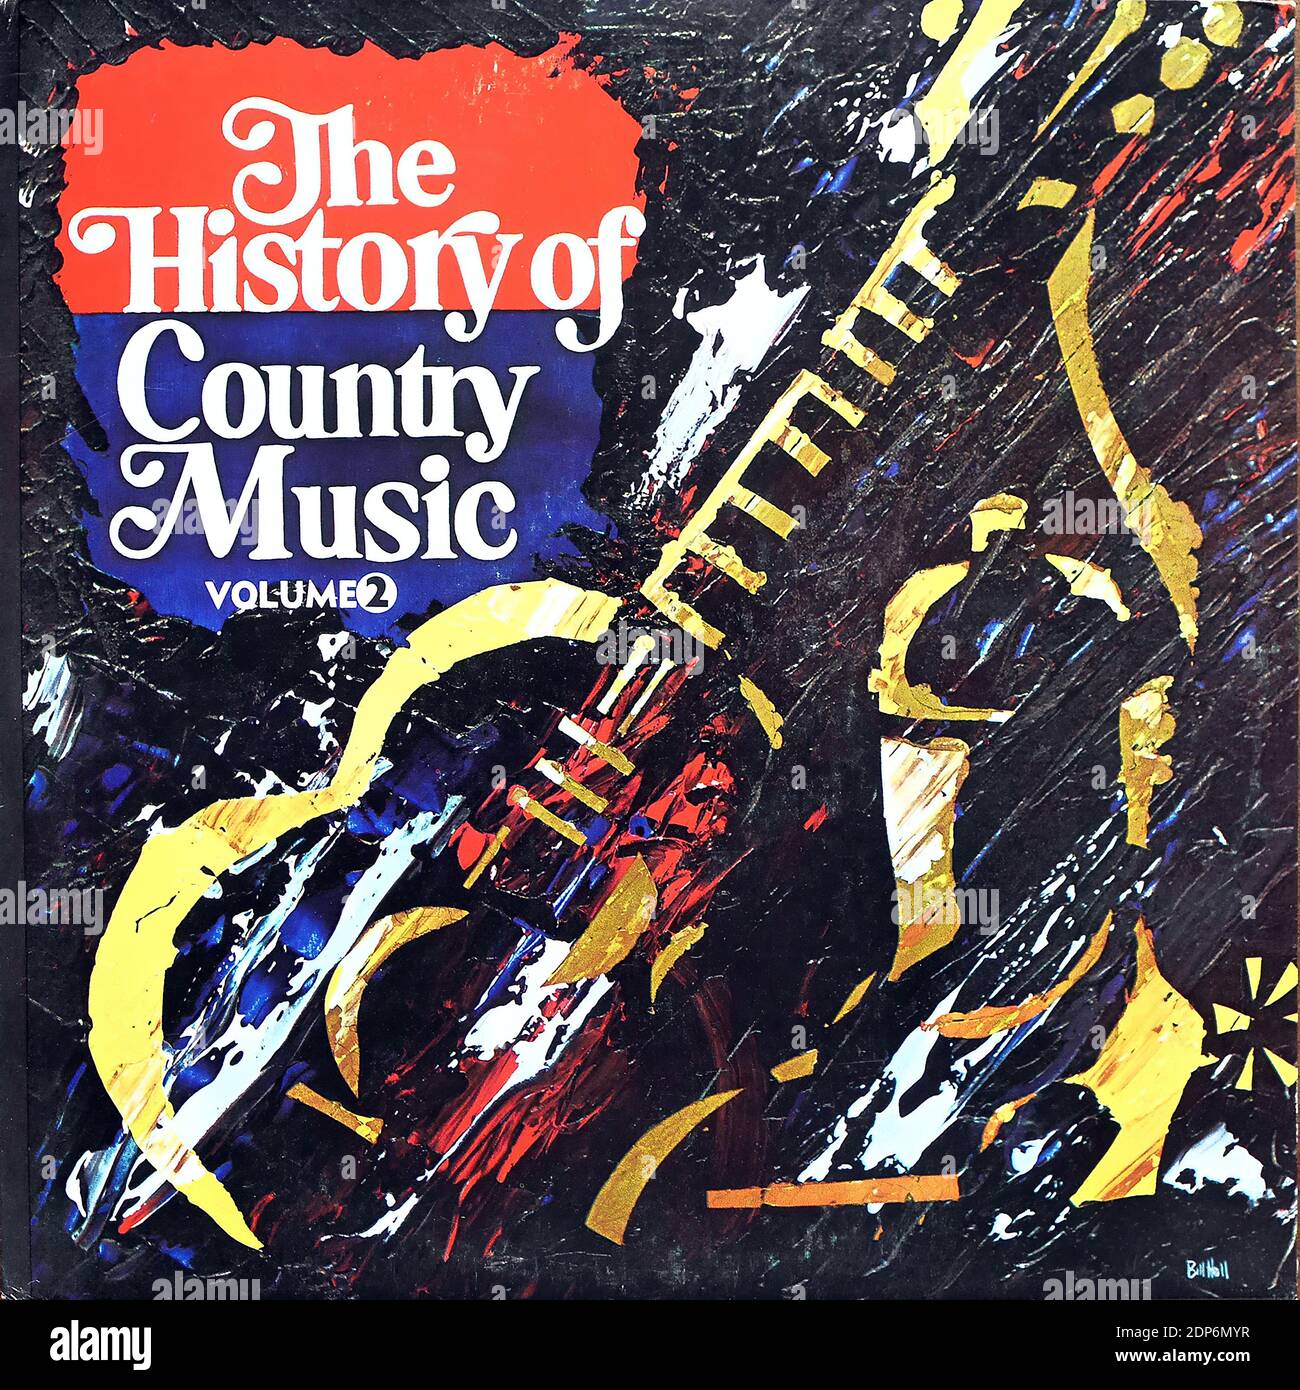 The History of Country Music Vol.2 - Roy Acuff, Cowboy Copas, Moon Mullican, Hank Williams, Tennesee Ernie Ford, Patti Page, The Carlisles, Hank Thompson, Tex Ritter, Johnny Ca - Vintage vinyl album cover Stock Photo